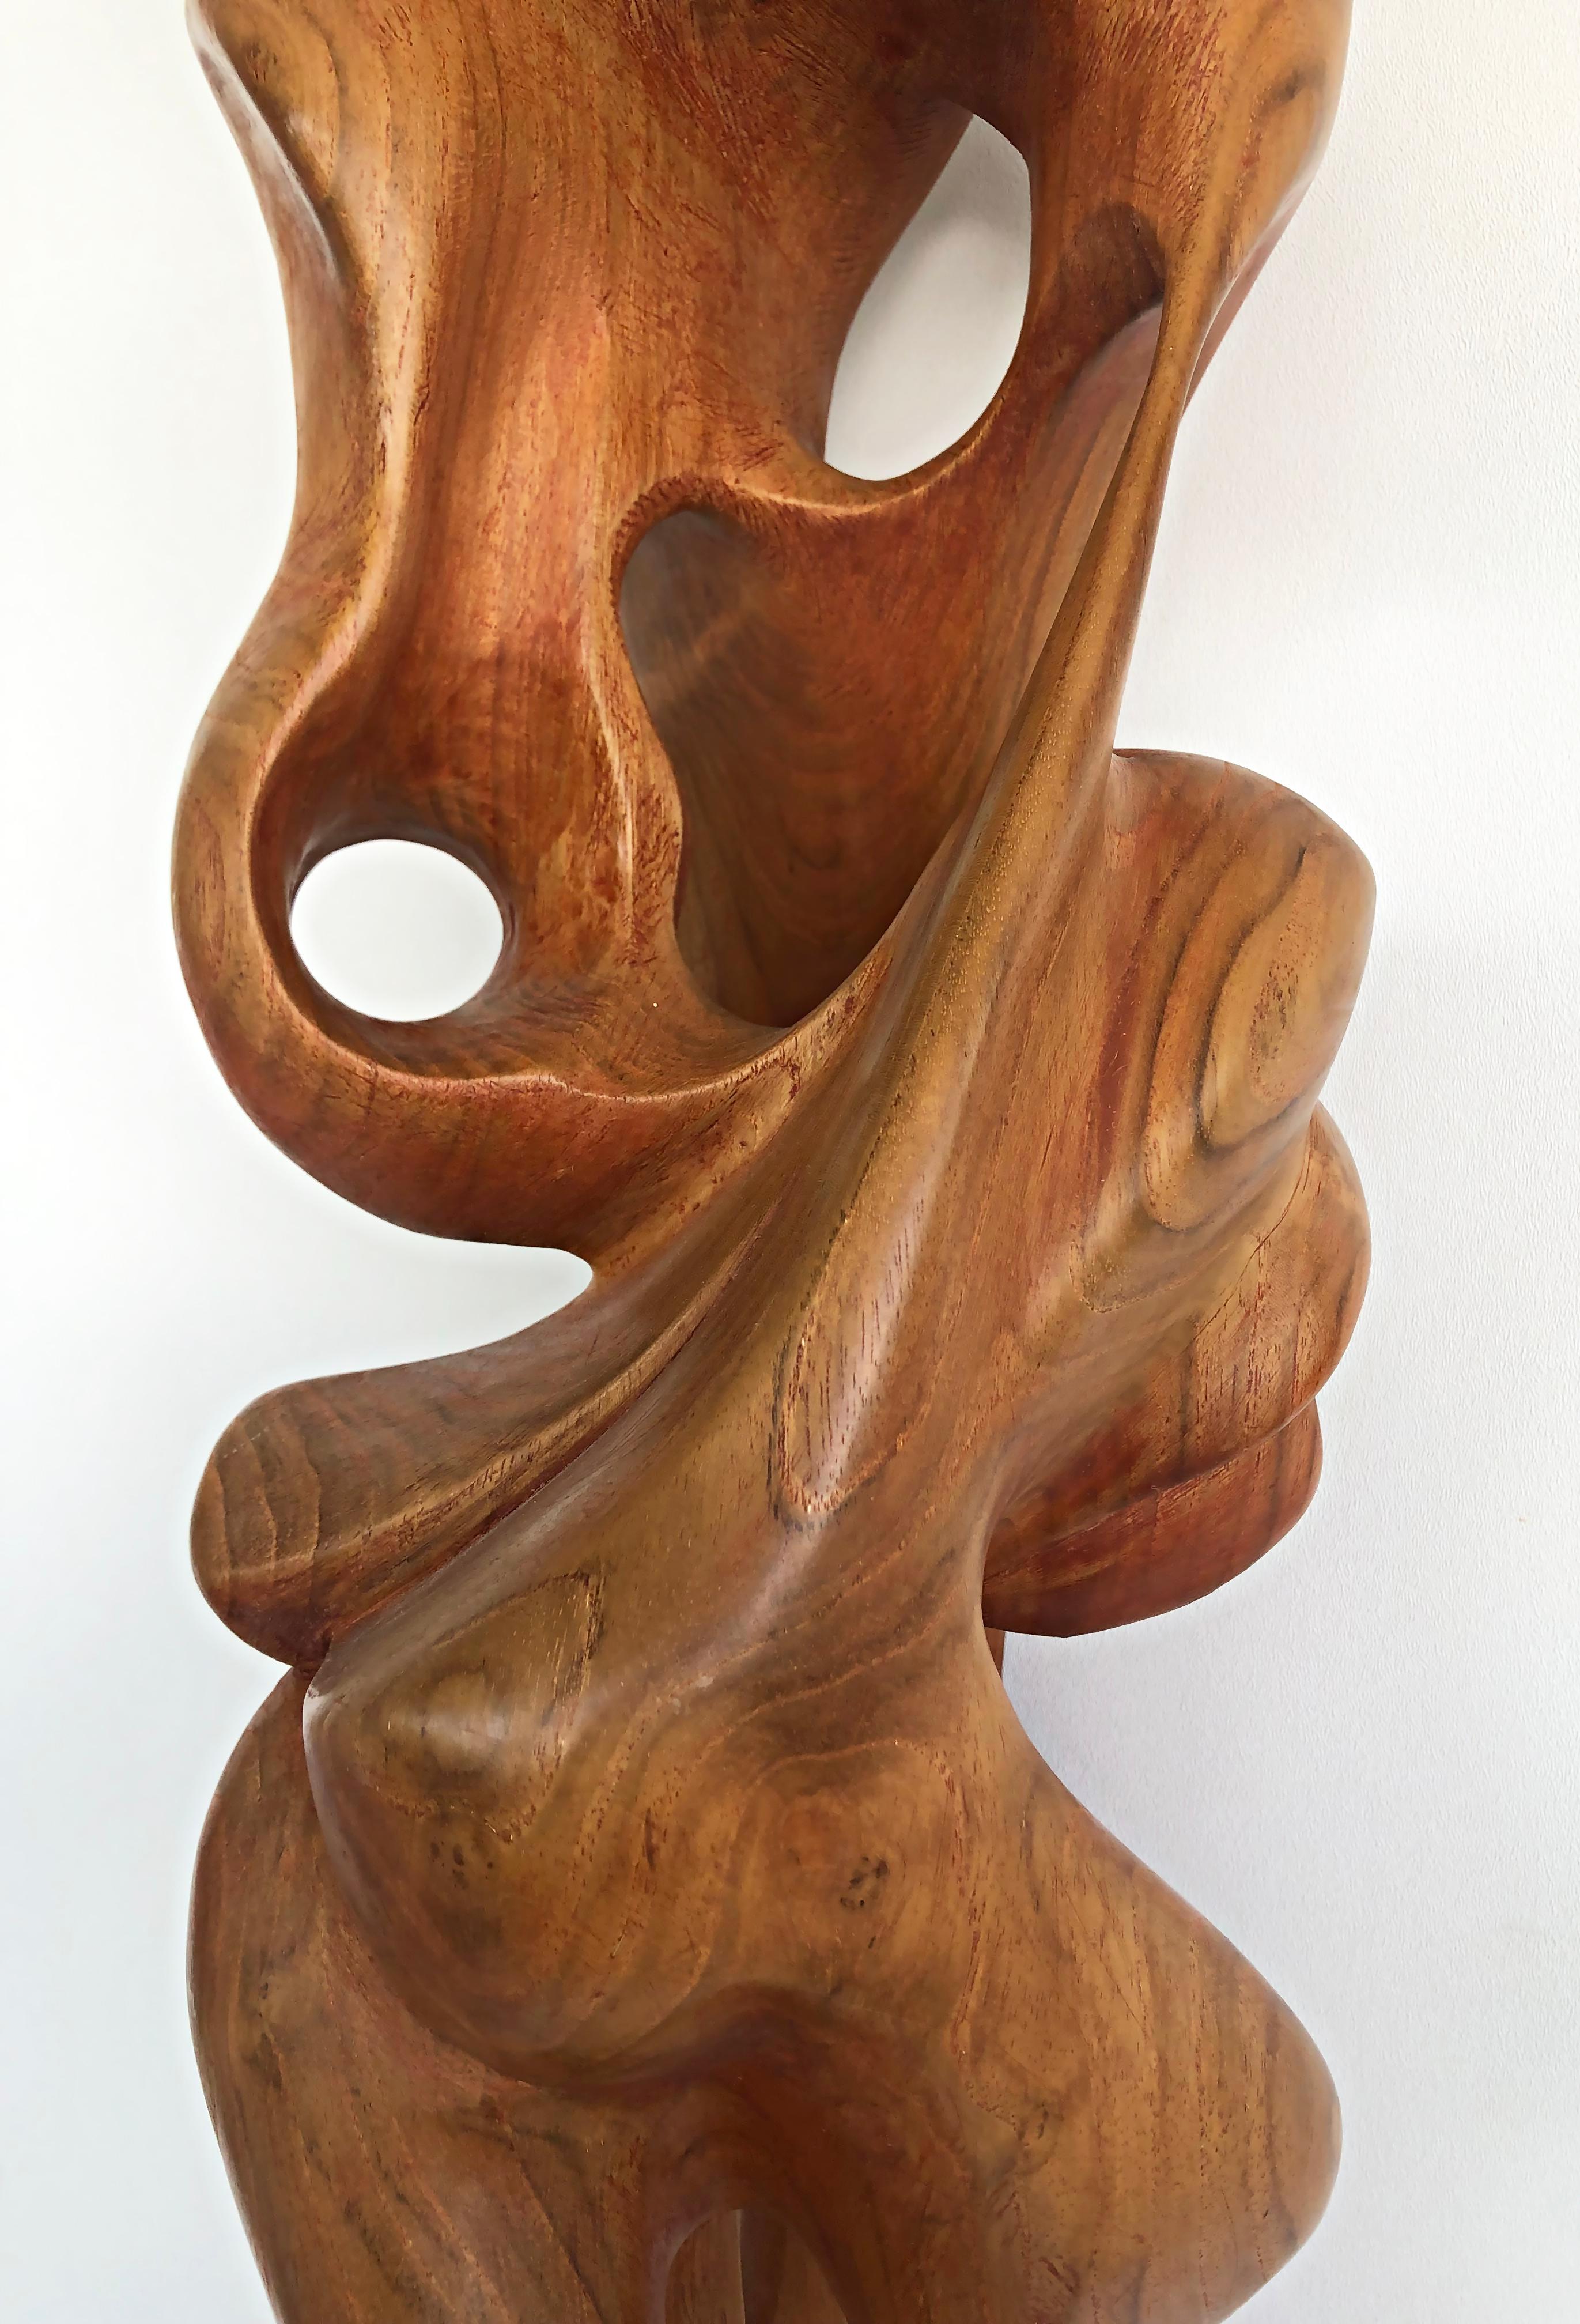 Tall Carved Teak Sculpture by Ramon Barales, Cuban American Artist, 2003 For Sale 2